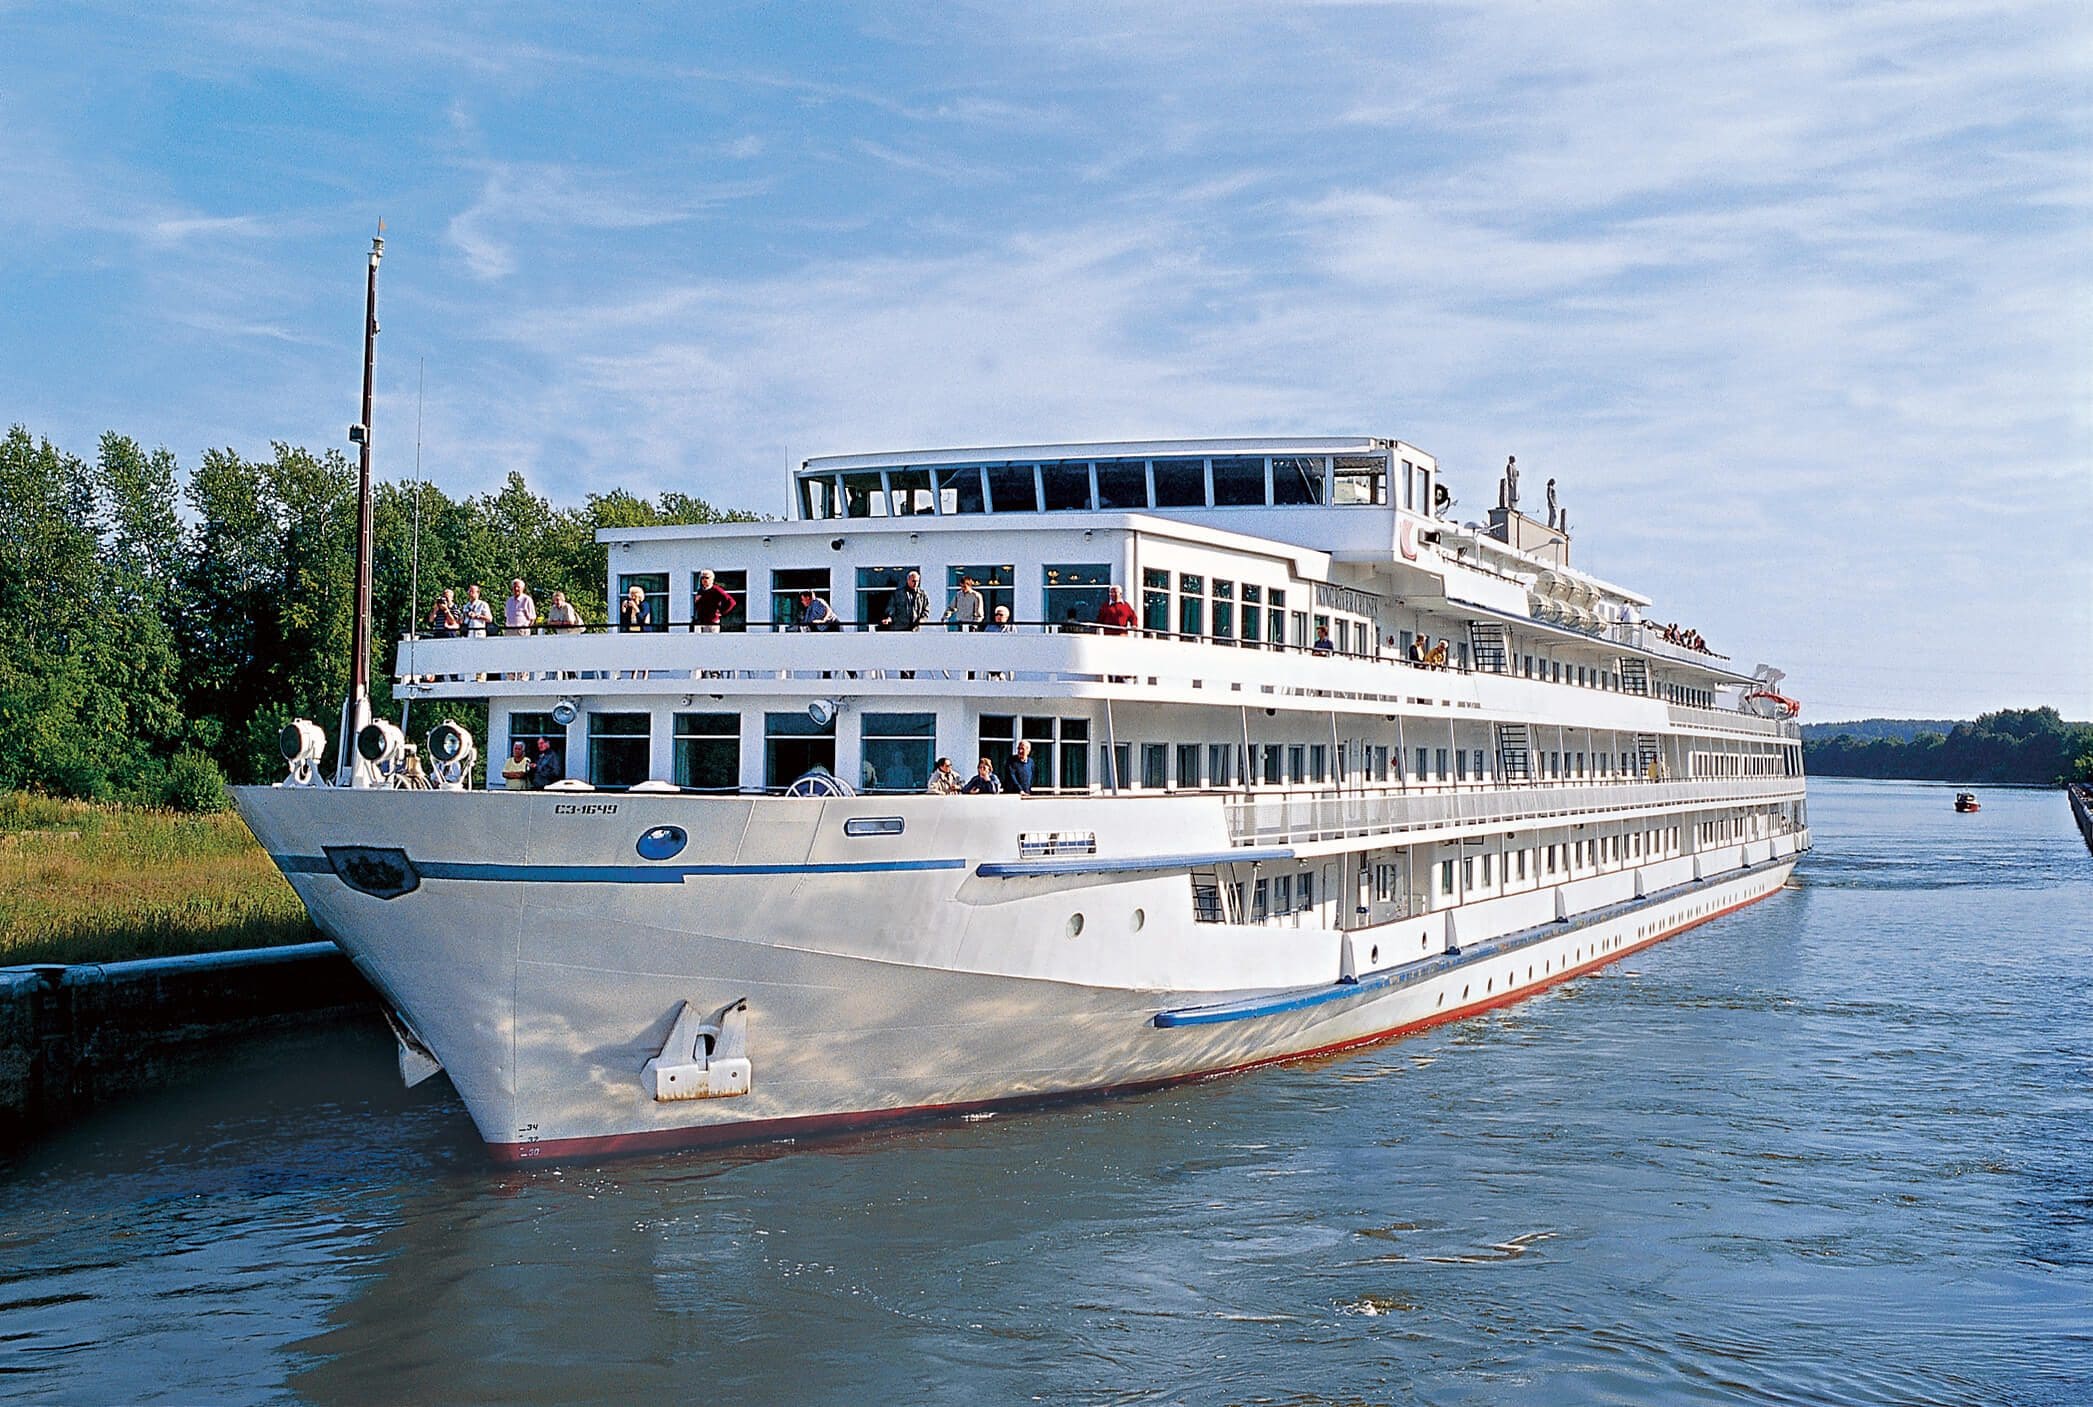 viking river cruise ship pictures